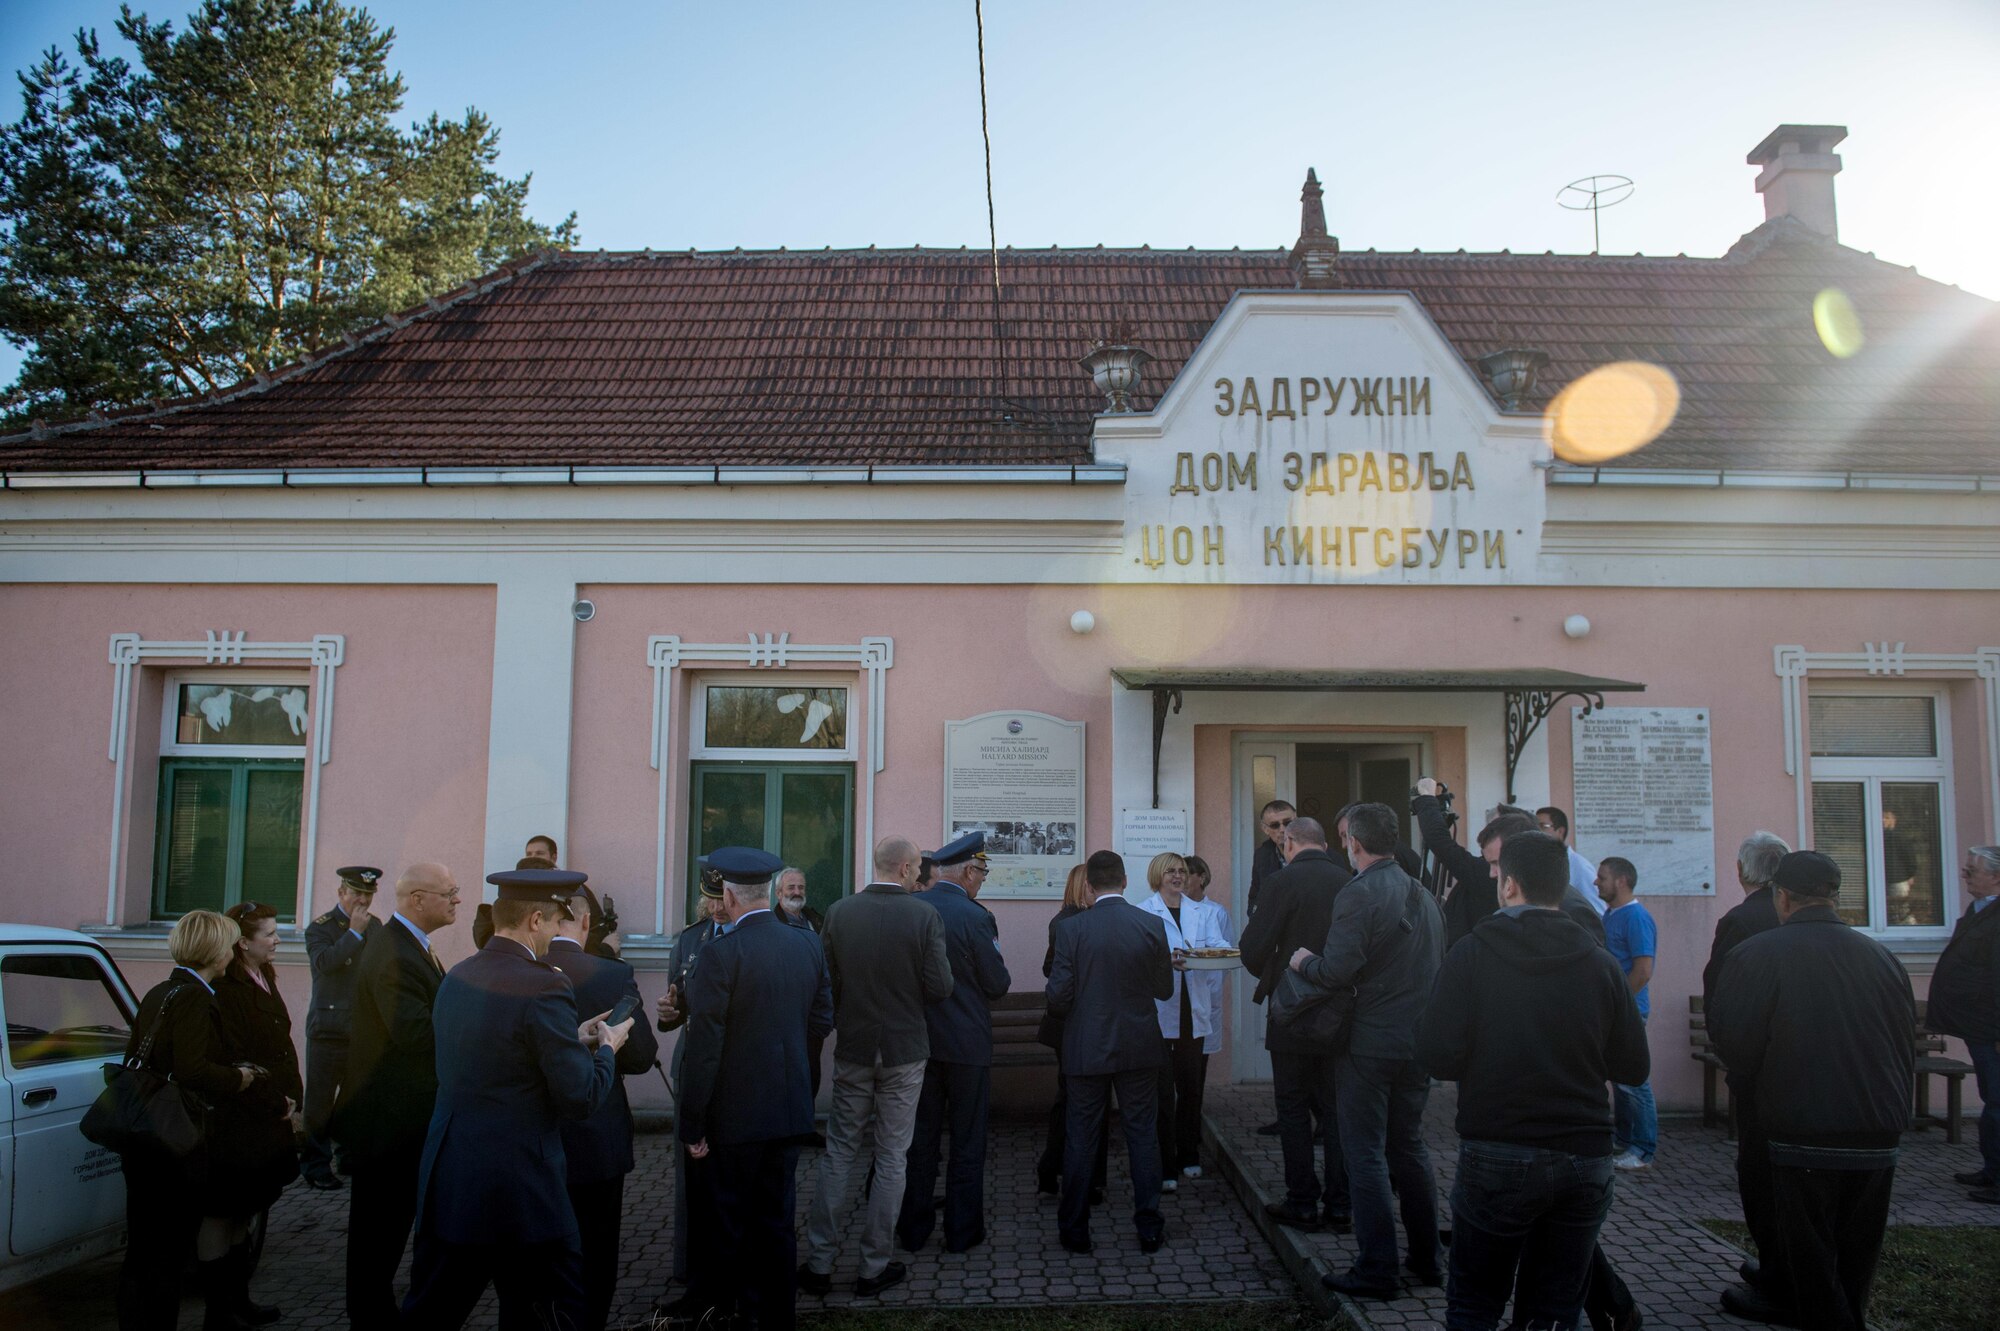 Americans, Brits and Serbians visit a hospital in Pranjani, Serbia, Nov. 17, 2016, that was used to treat wounded Airmen during Operation Halyard. The U.S. State Department, U.S. Air Force, Royal Air Force and Serbian Armed Forces were in attendance to commemorate the event and the heroic actions of the Serbian people. Operation Halyard was the rescue mission to save more than 500 Allied Airmen who were shot down over Serbia during WWII. The local Serbians housed and fed the downed Airmen, while also keeping their presence a secret from the German forces searching for them. The operation was, and still is, the largest rescue of downed Americans. (U.S. Air Force photo by Tech. Sgt. Ryan Crane)